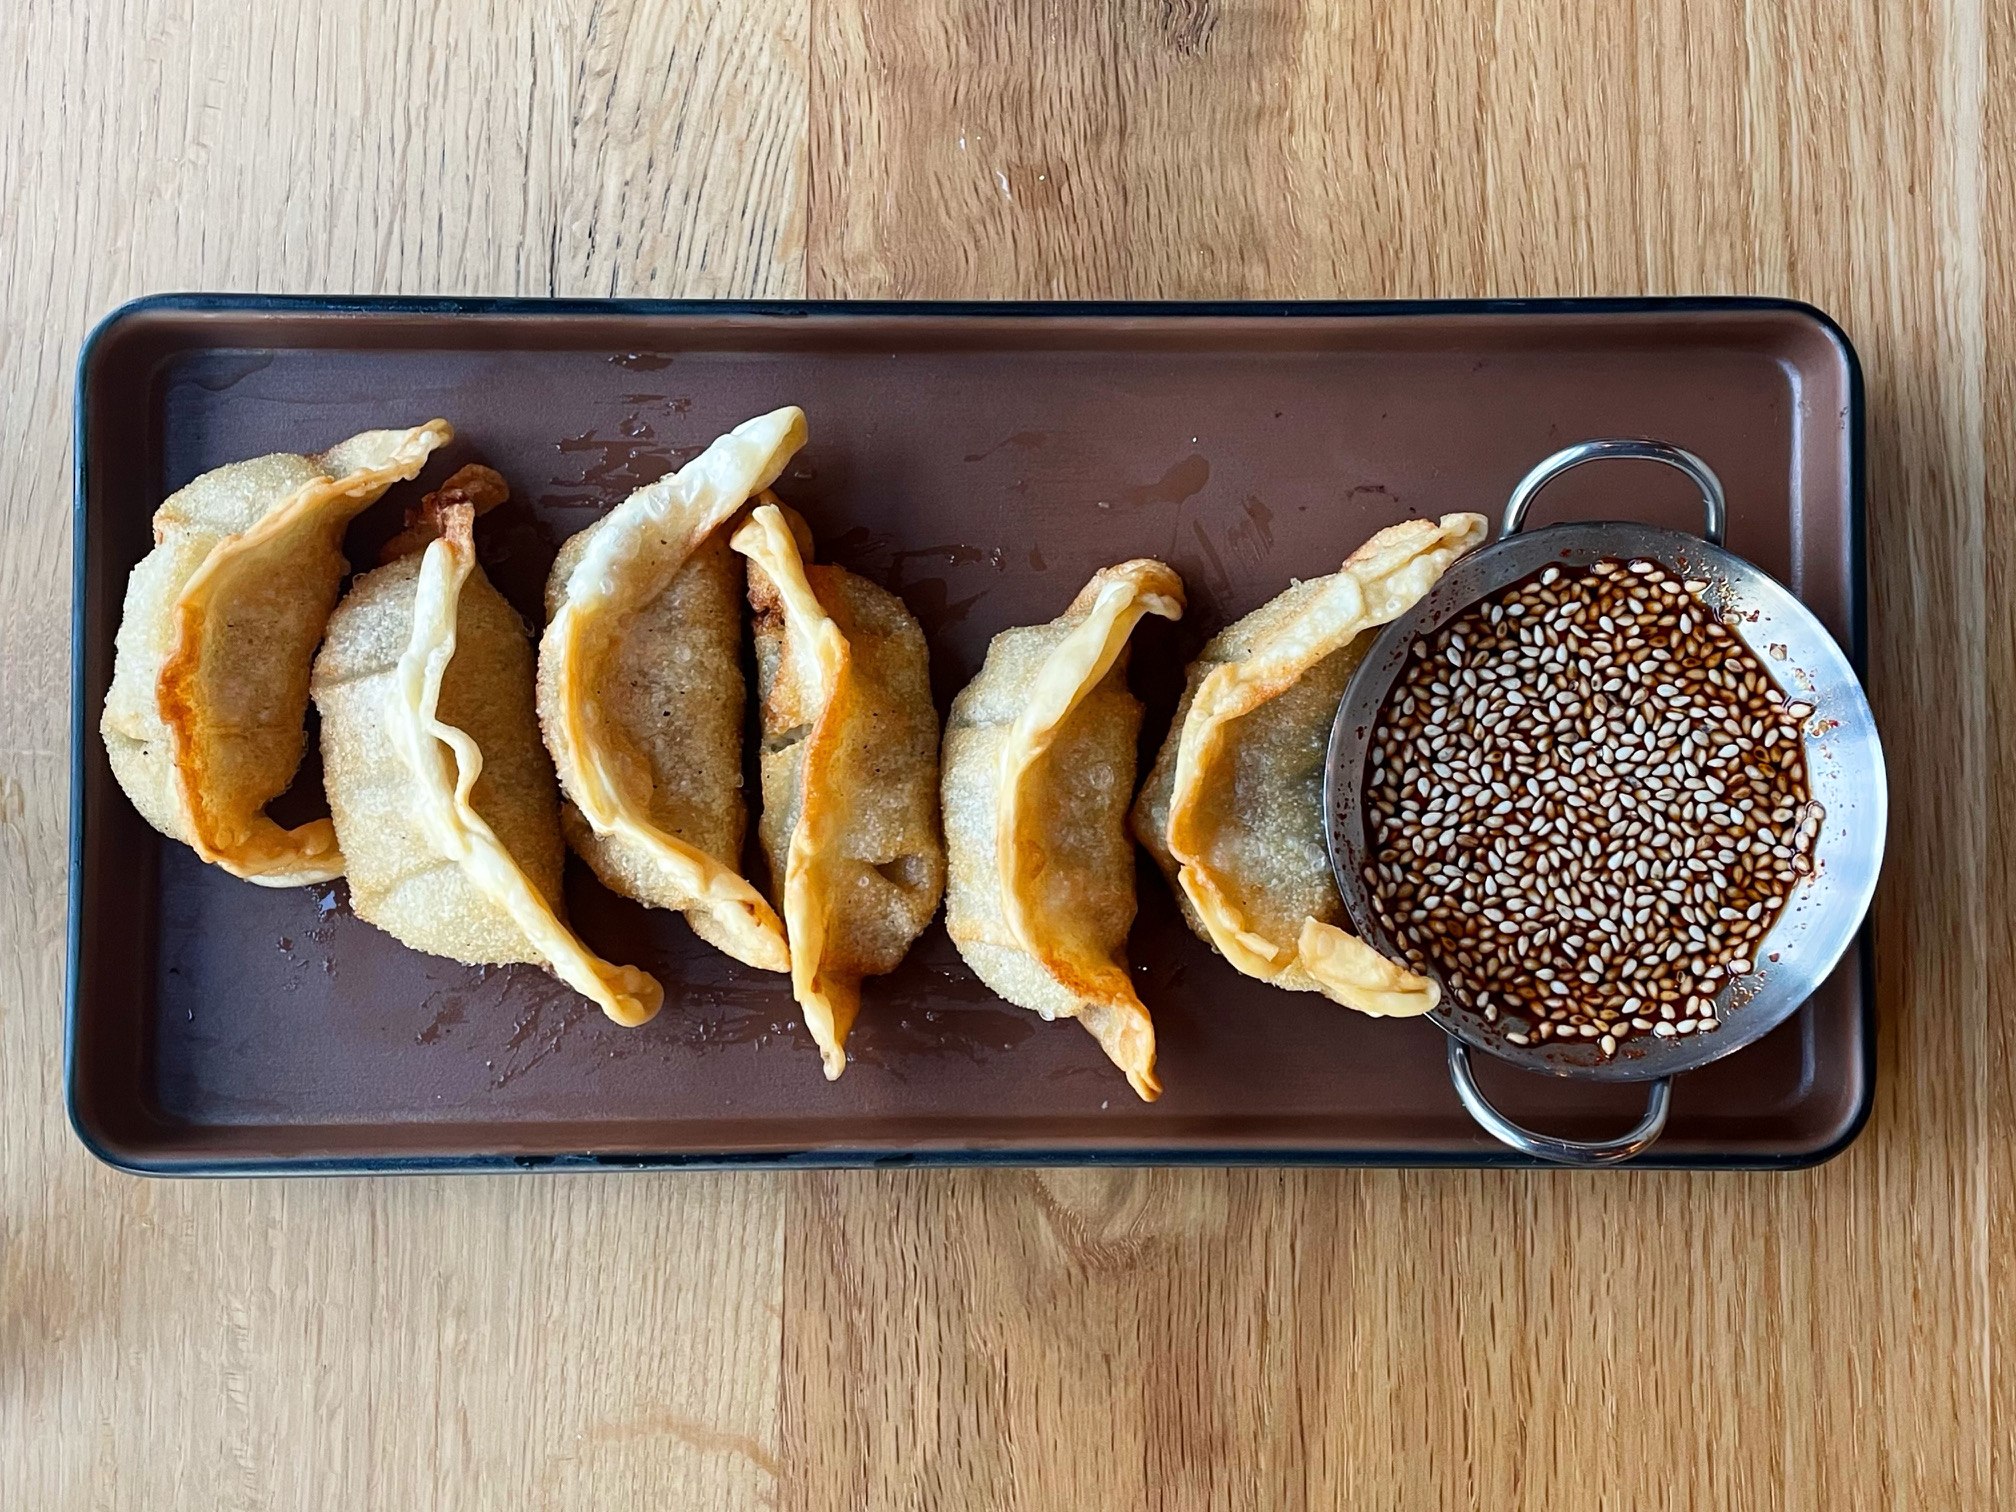 An overhead photo shows a rectangular brown plate with six fried dumplings. On the right, there is a small, miniature wok filled with a brown sauce and lots of sesame seeds. Photo by Alyssa Buckley.